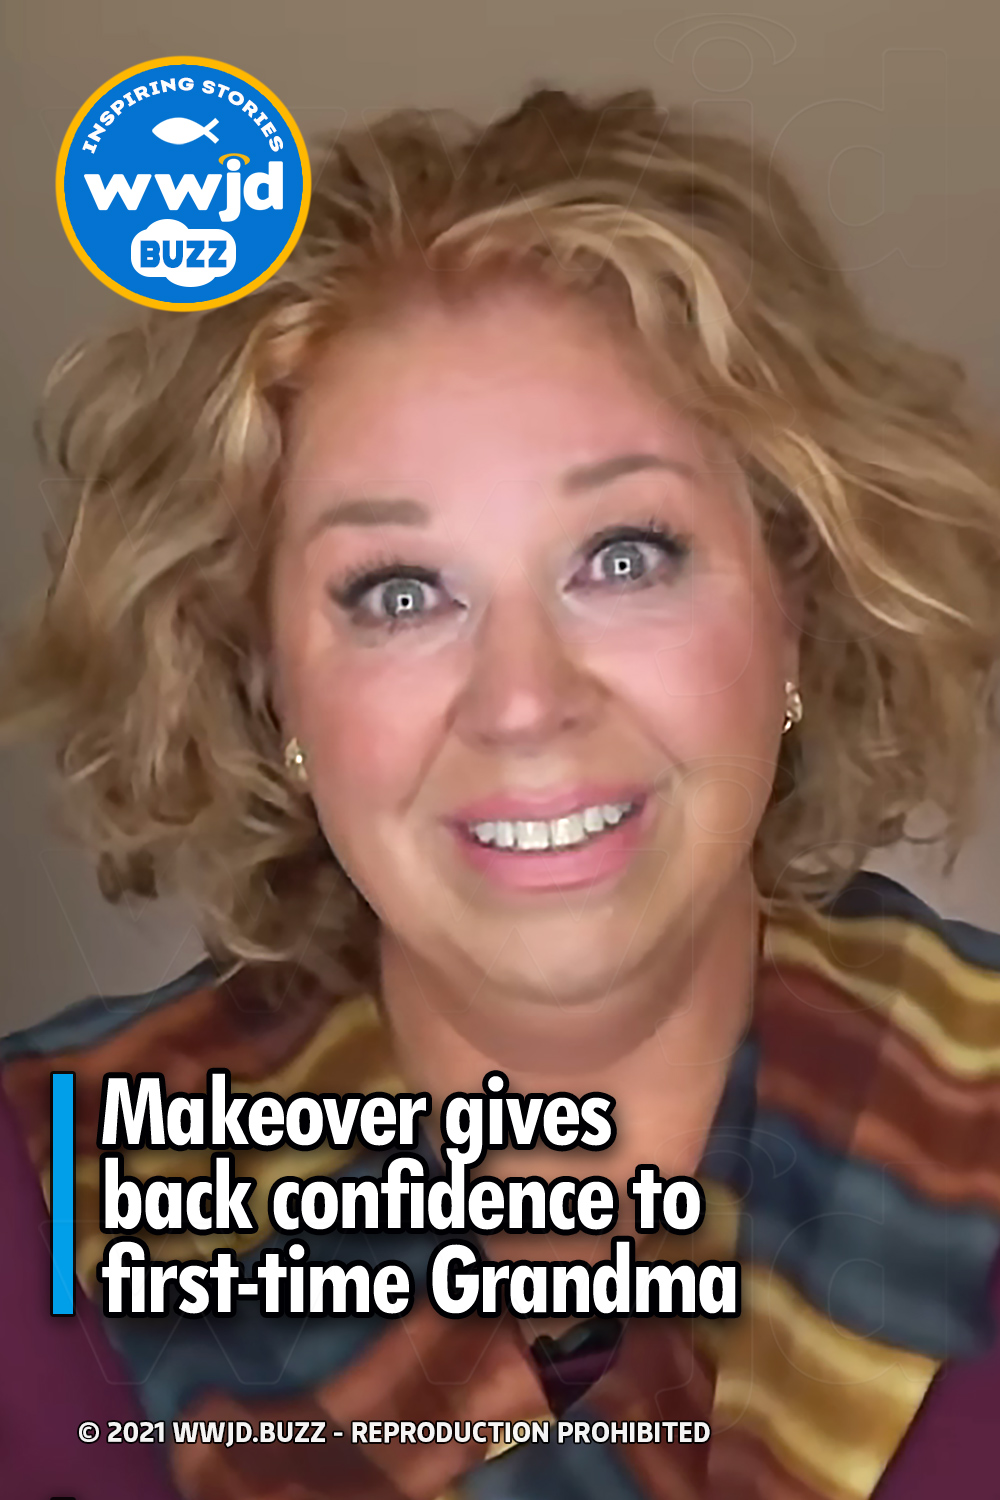 Makeover gives back confidence to first-time Grandma